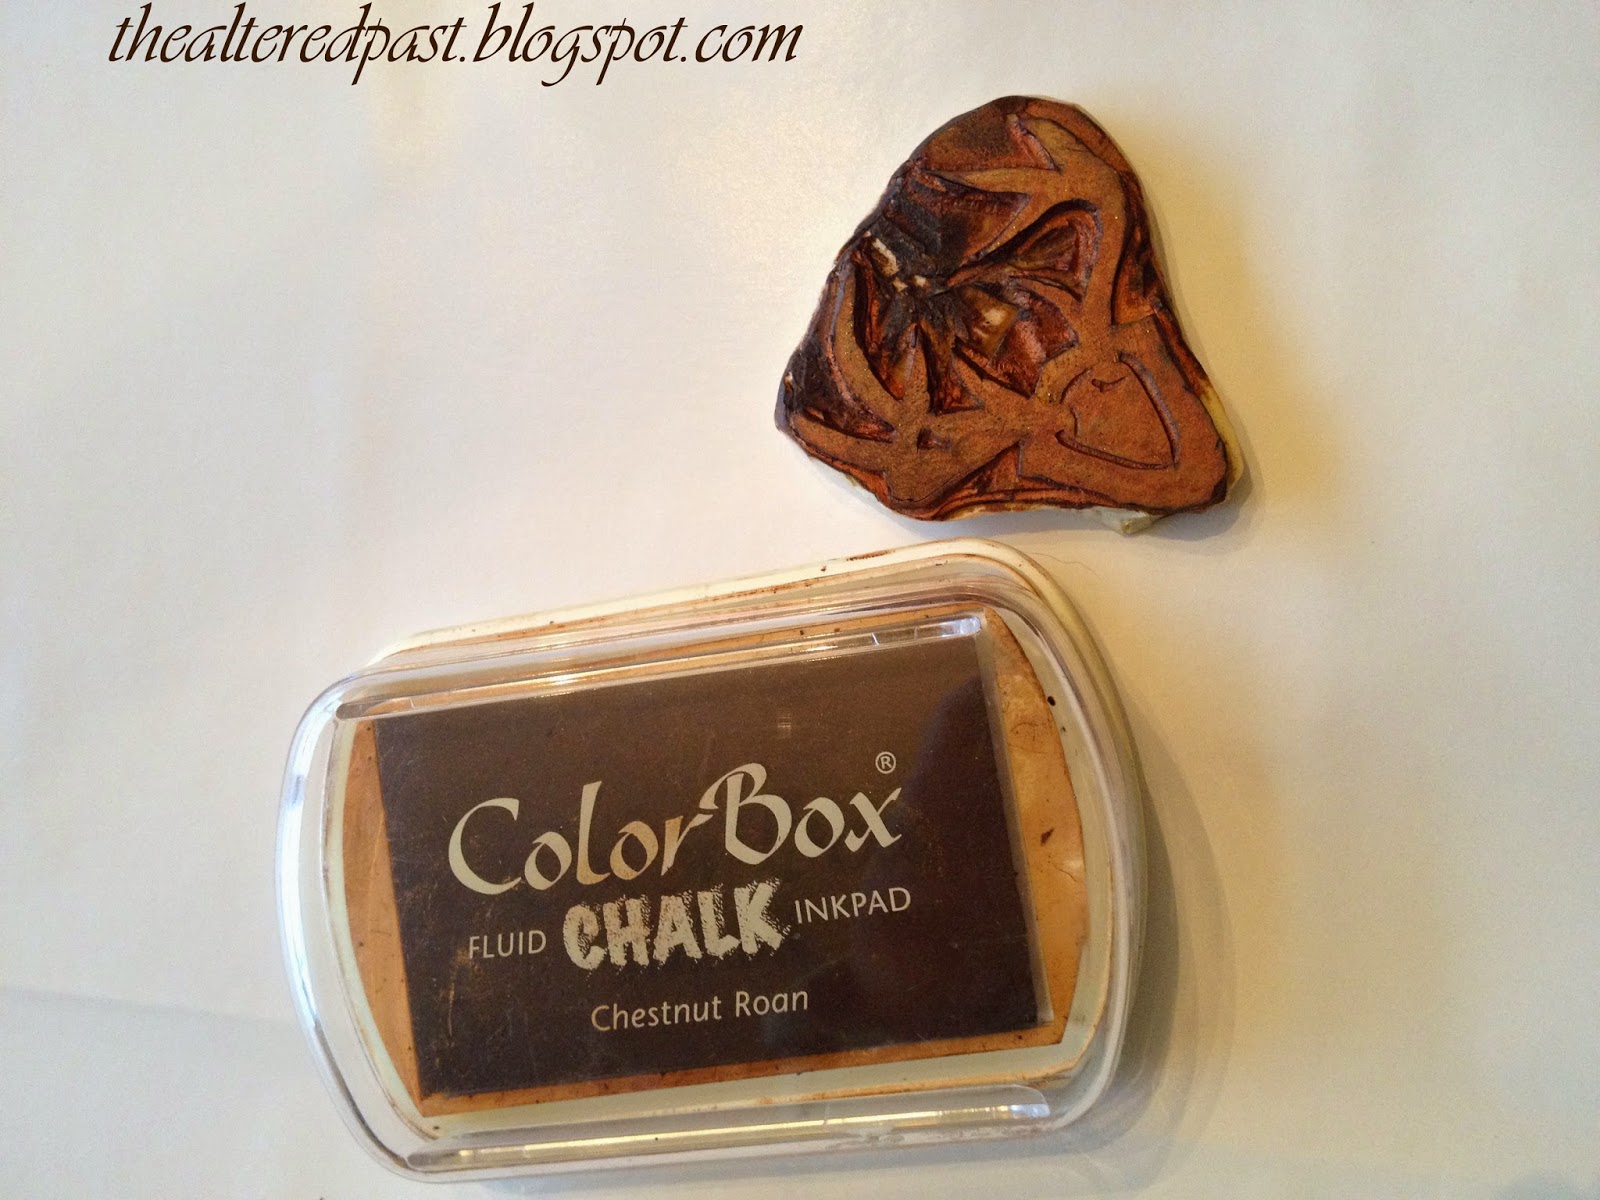 handmade rubber stamp, mounted deer head, the altered past blog